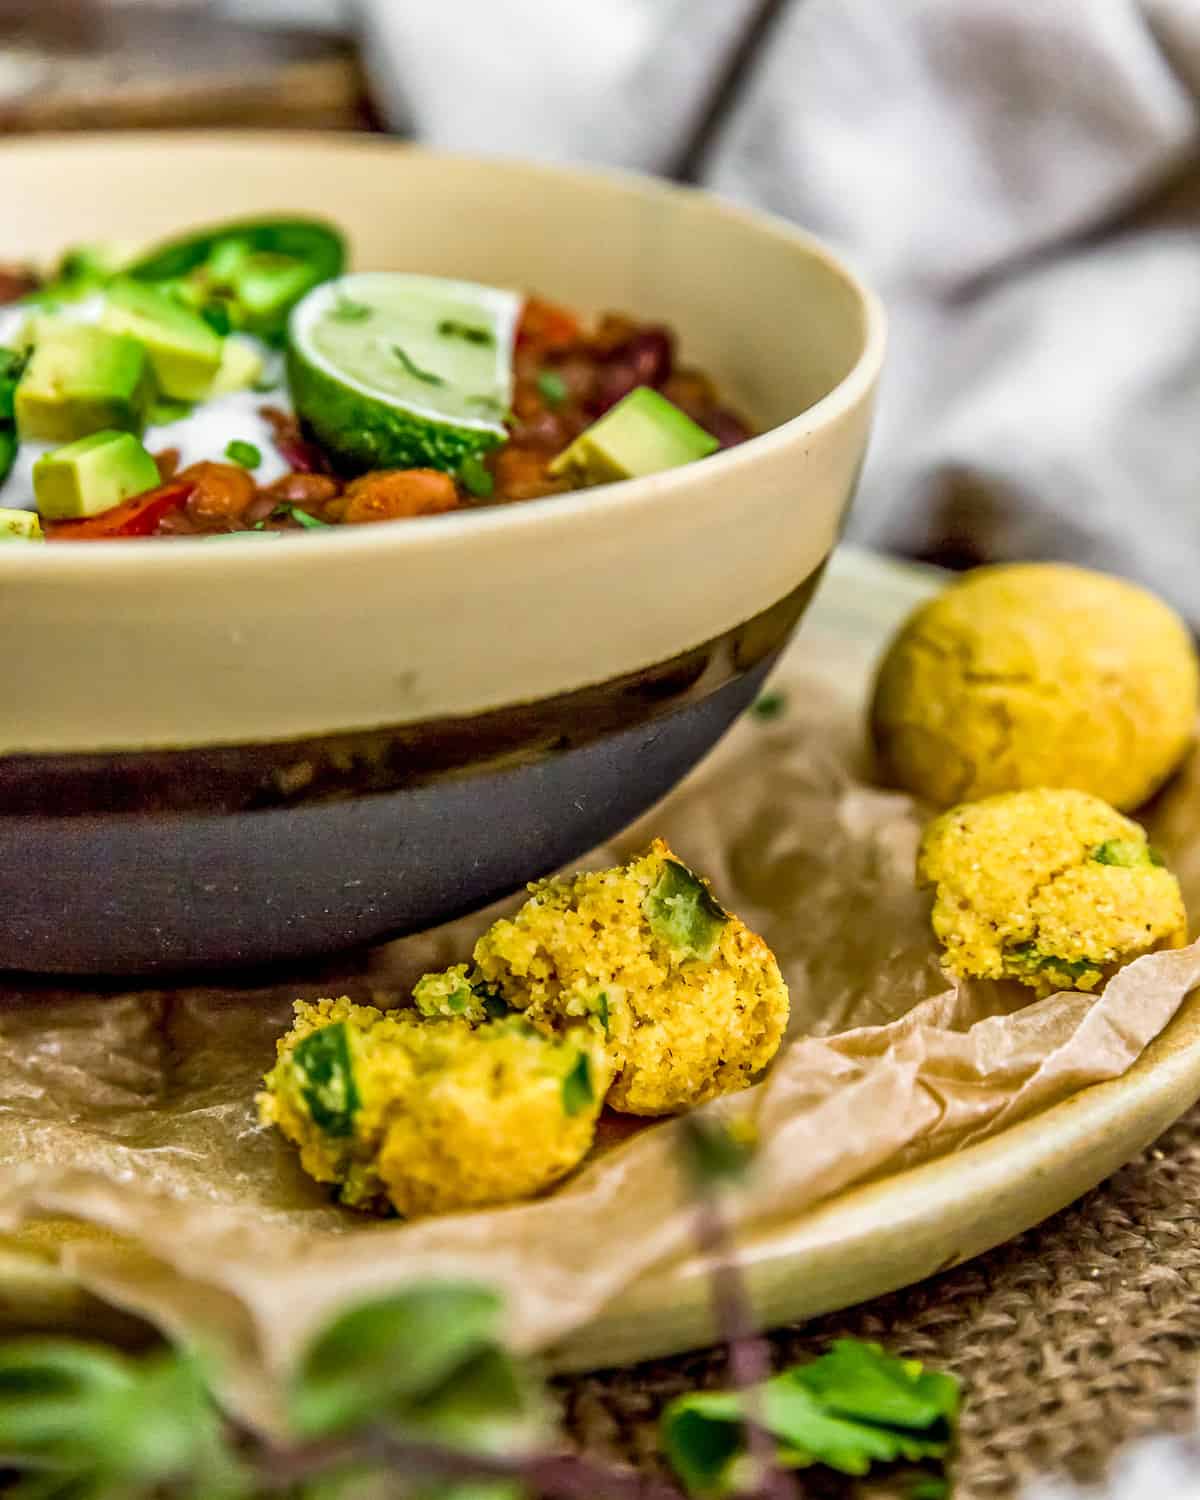 Jalapeño Cornmeal Drop Biscuits with stew